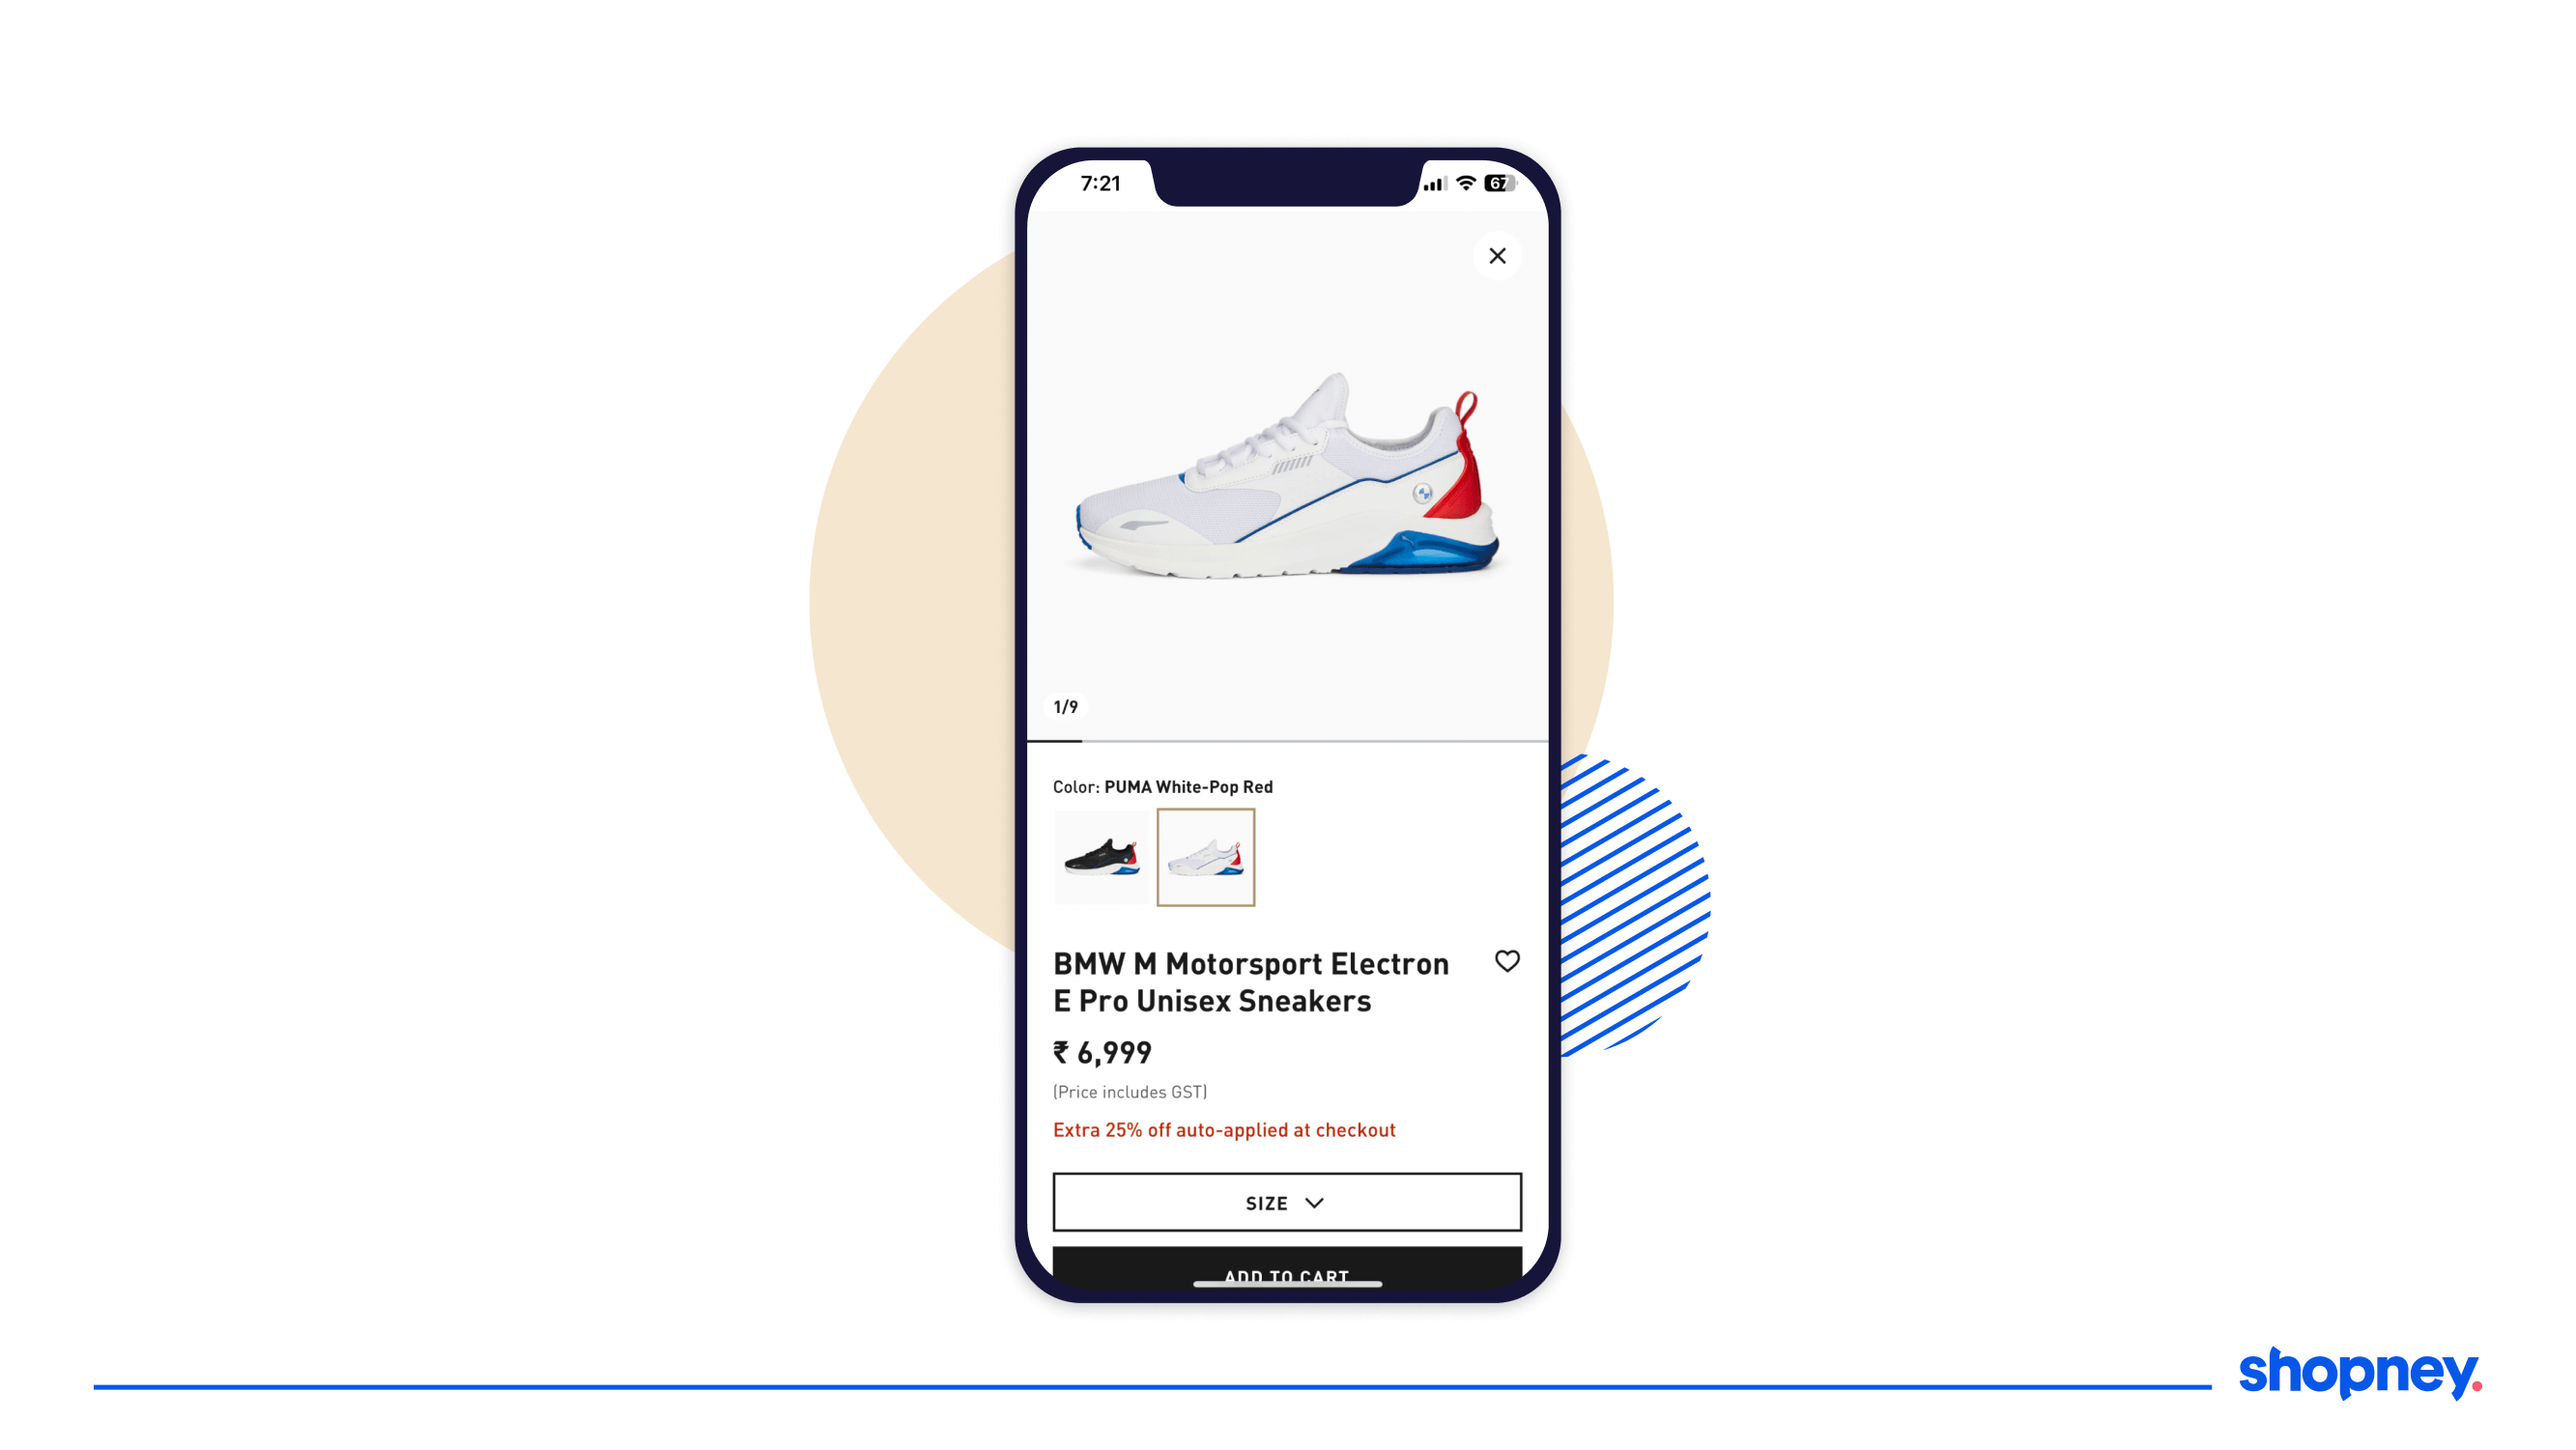 product details on the mobile app